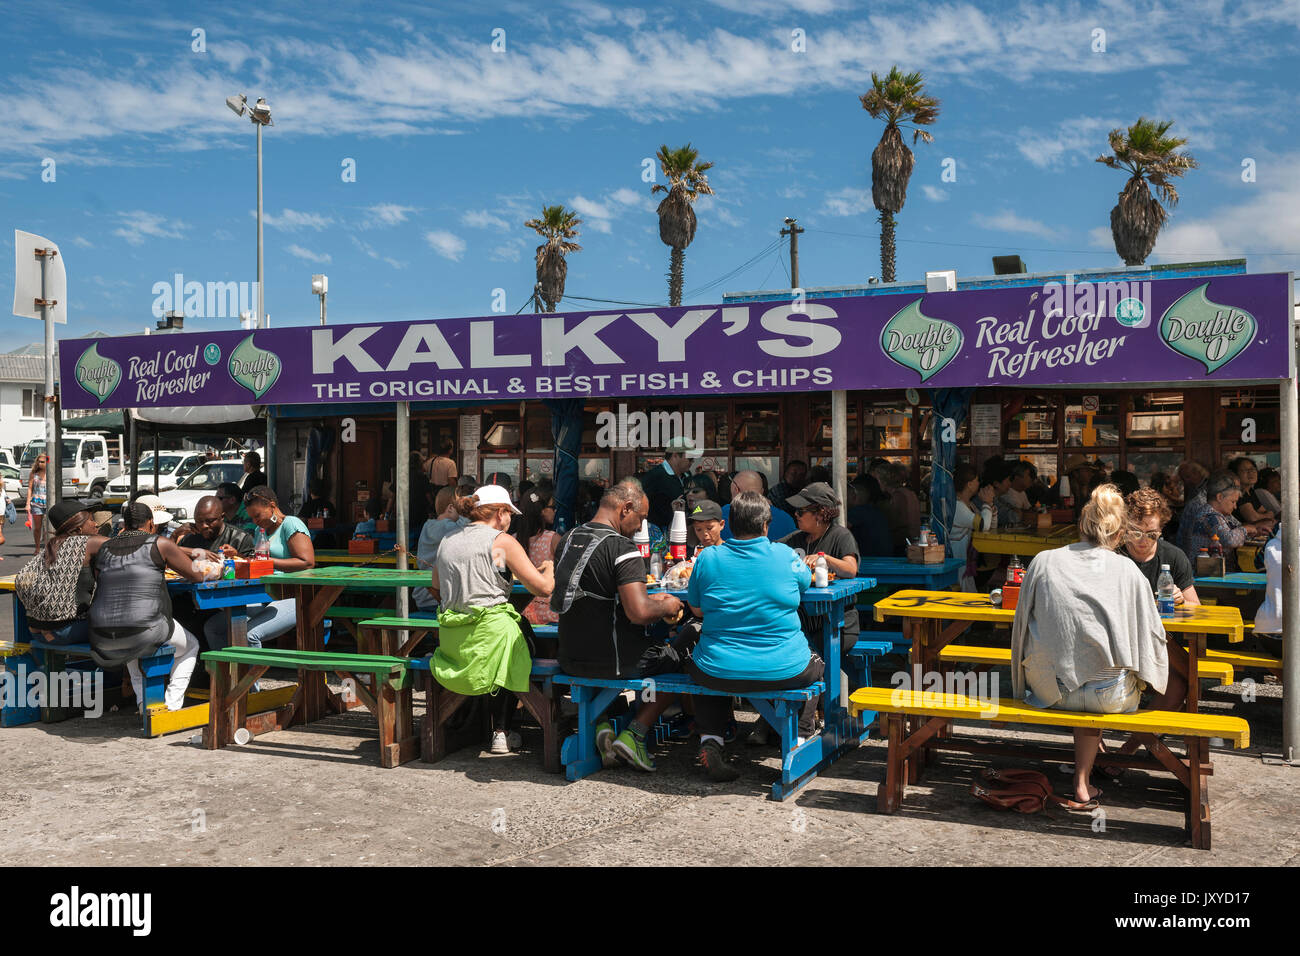 Kalky's fish & chip restaurant in Kalk Bay harbour, Cape Town, South Africa. Stock Photo